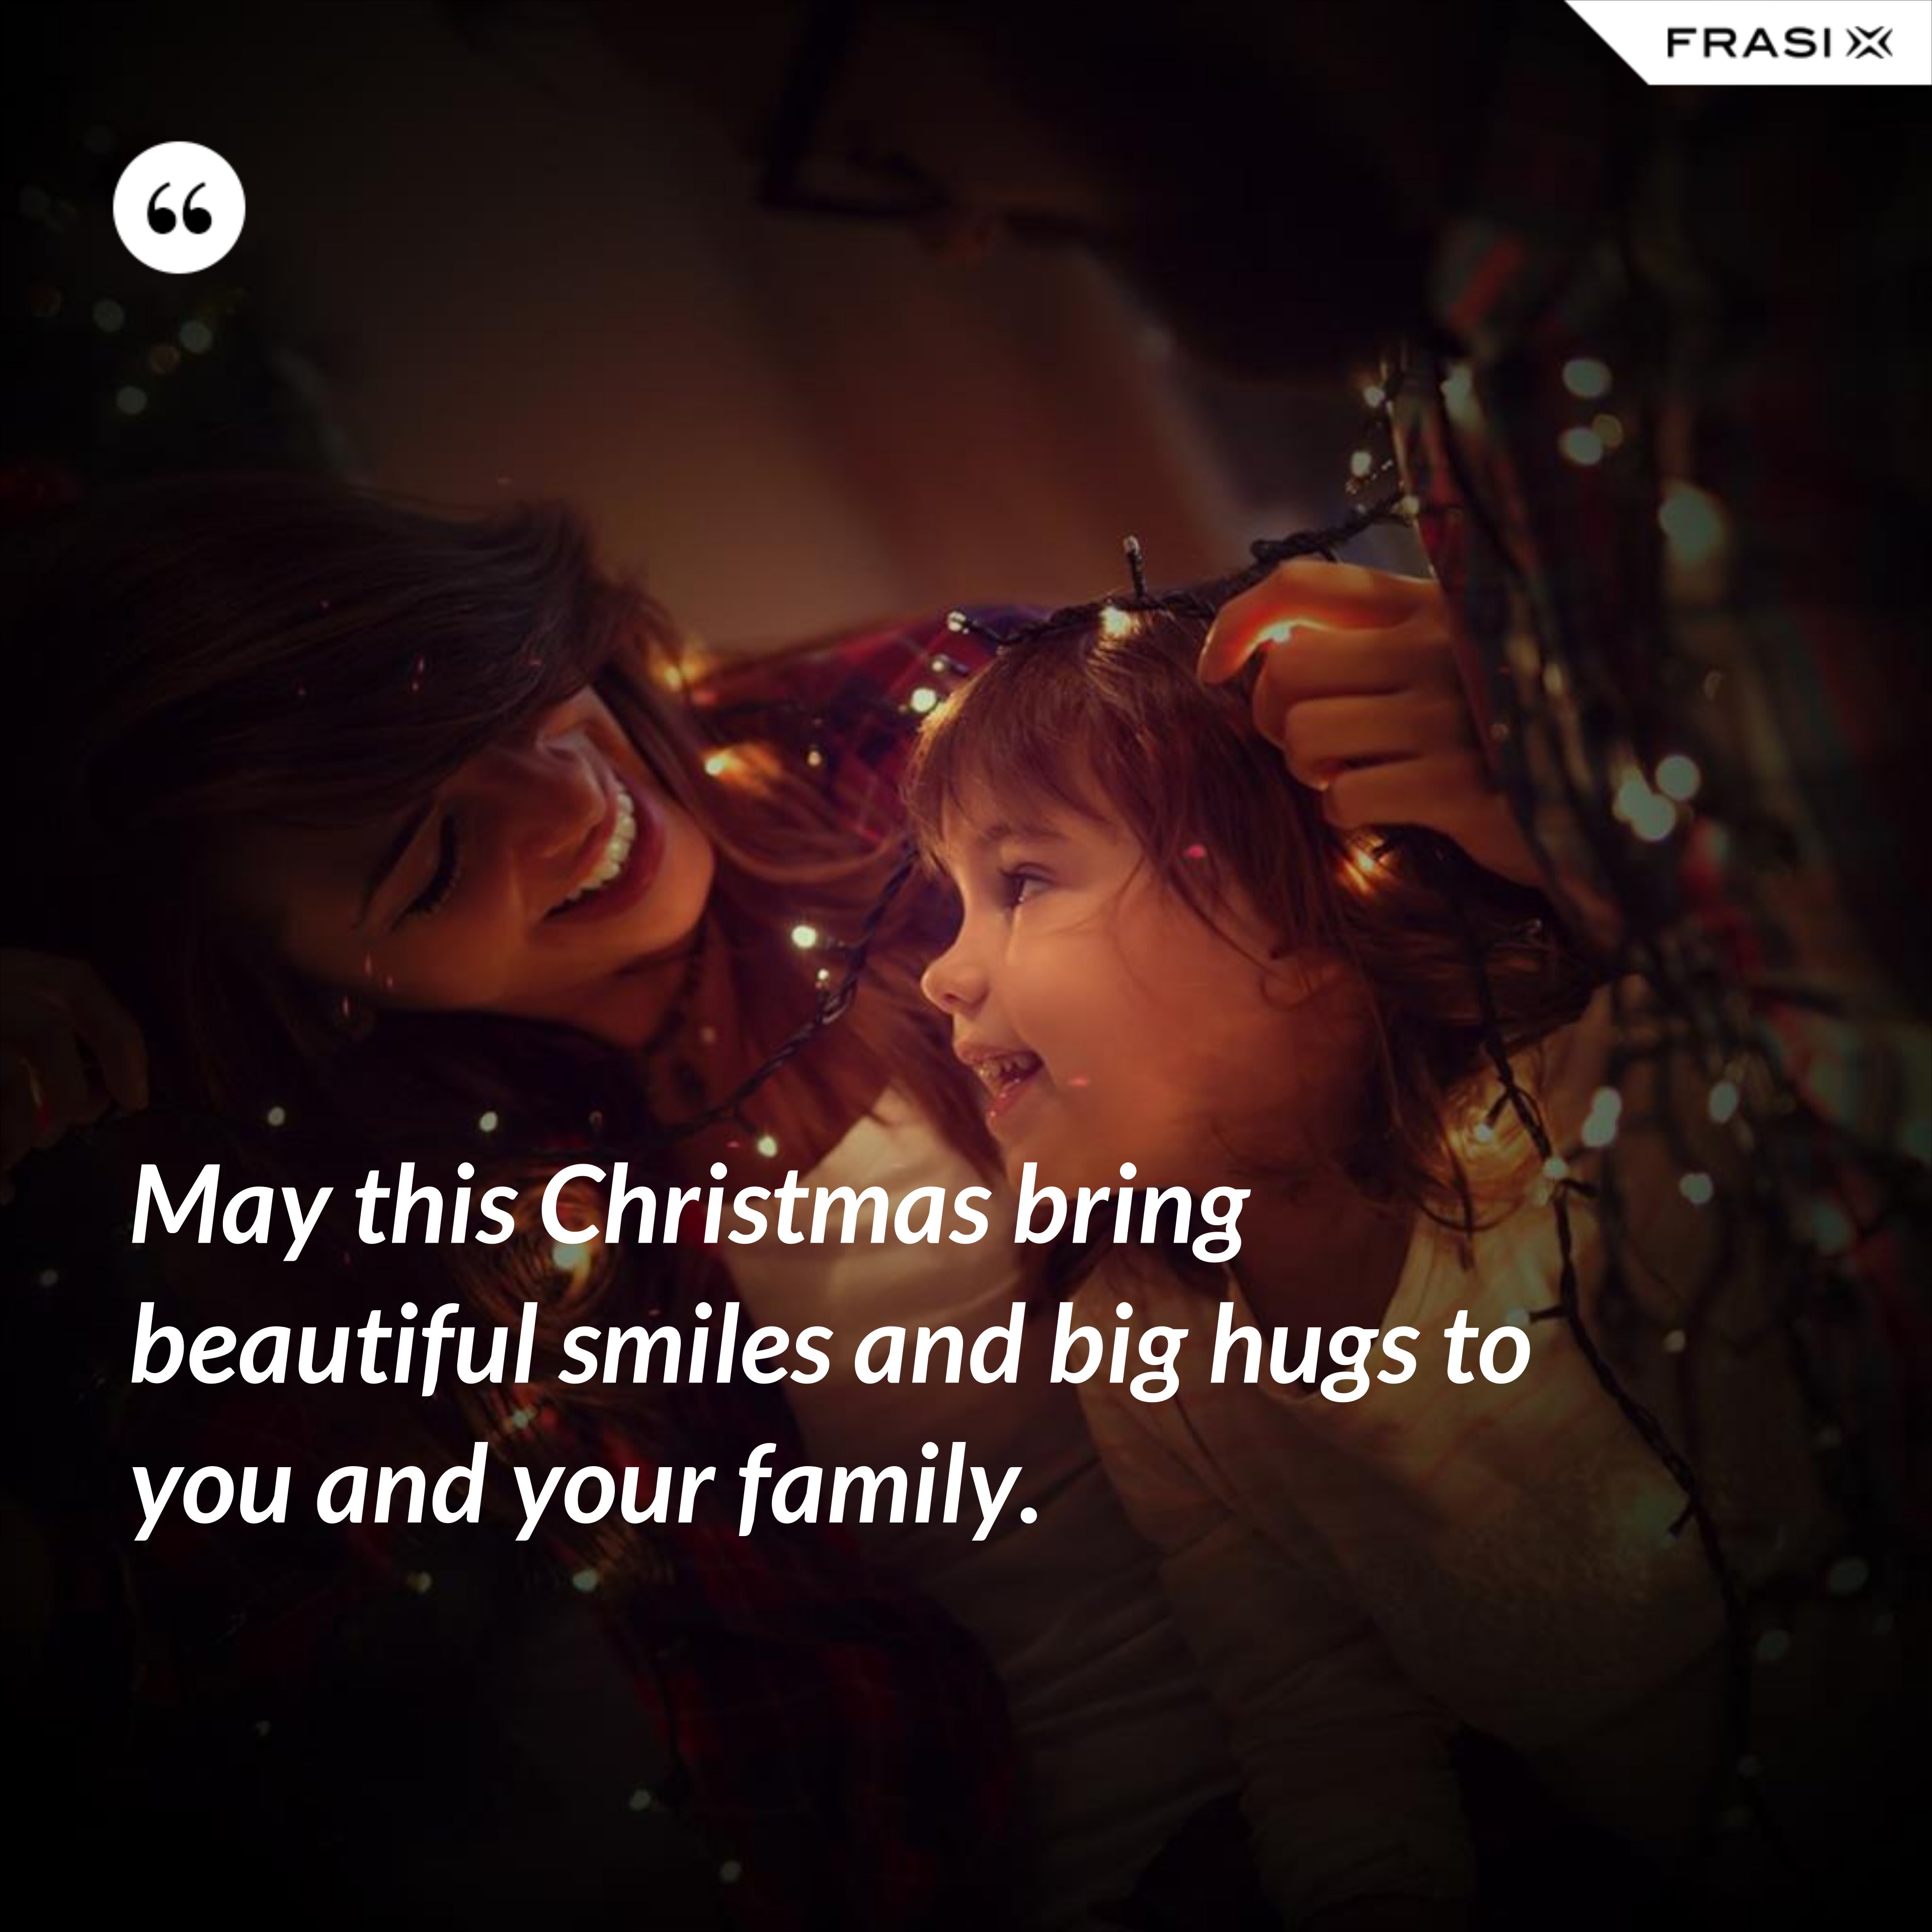 May this Christmas bring beautiful smiles and big hugs to you and your family. - Anonimo